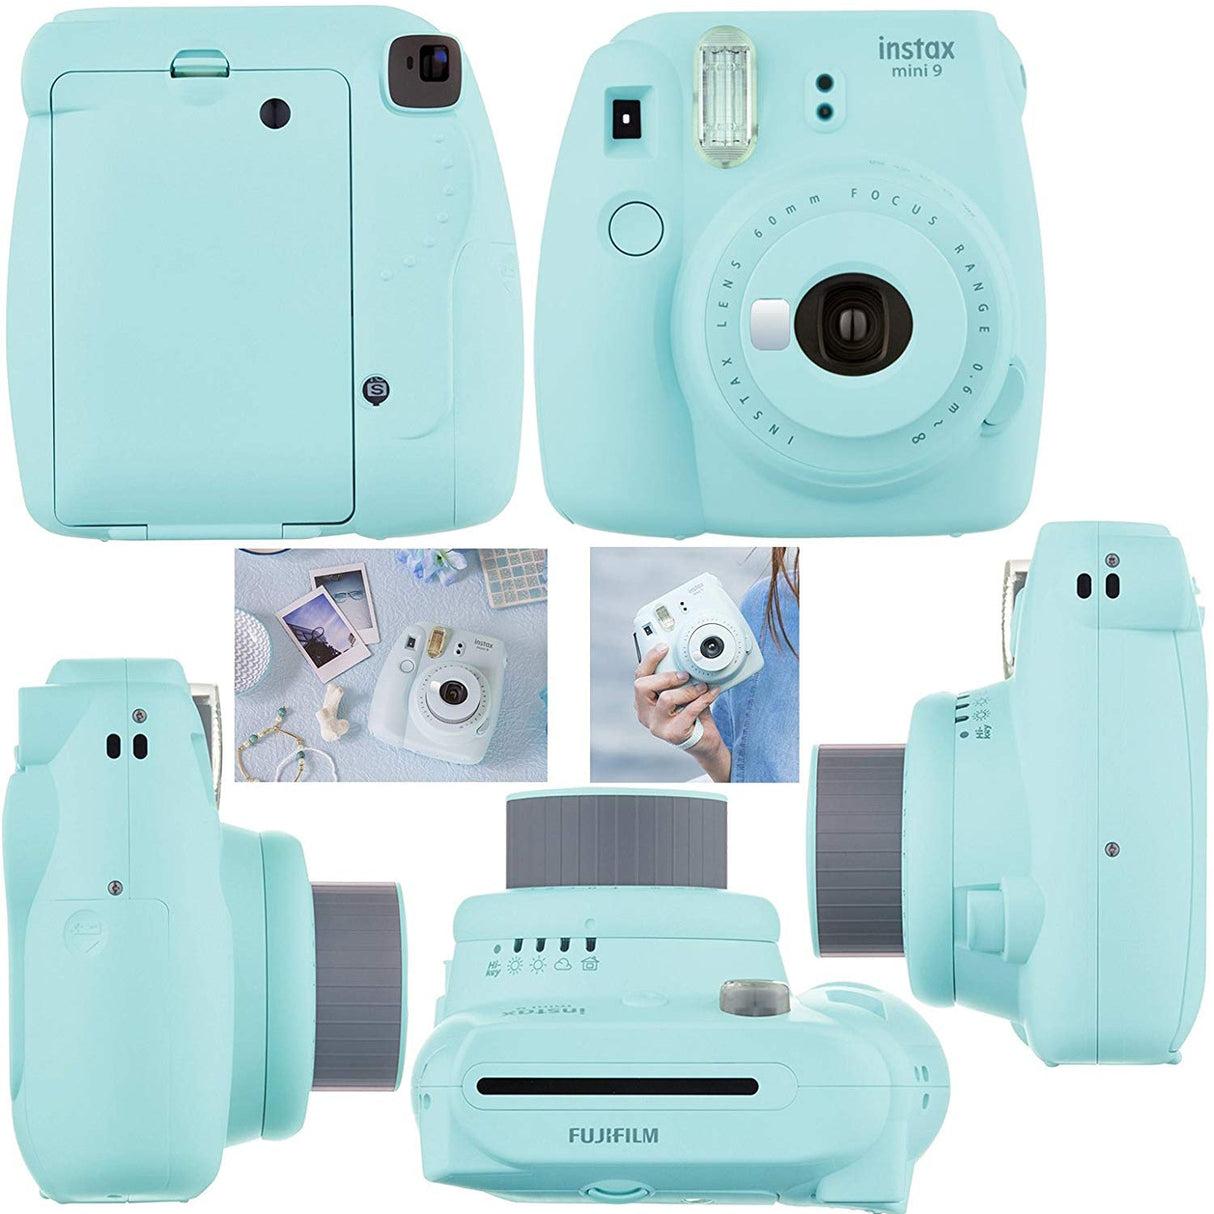  Fujifilm Instax Mini 12 Instant Camera with Case, Decoration  Stickers, Frames, Photo Album and More Accessory kit (Mint Green)… :  Electronics